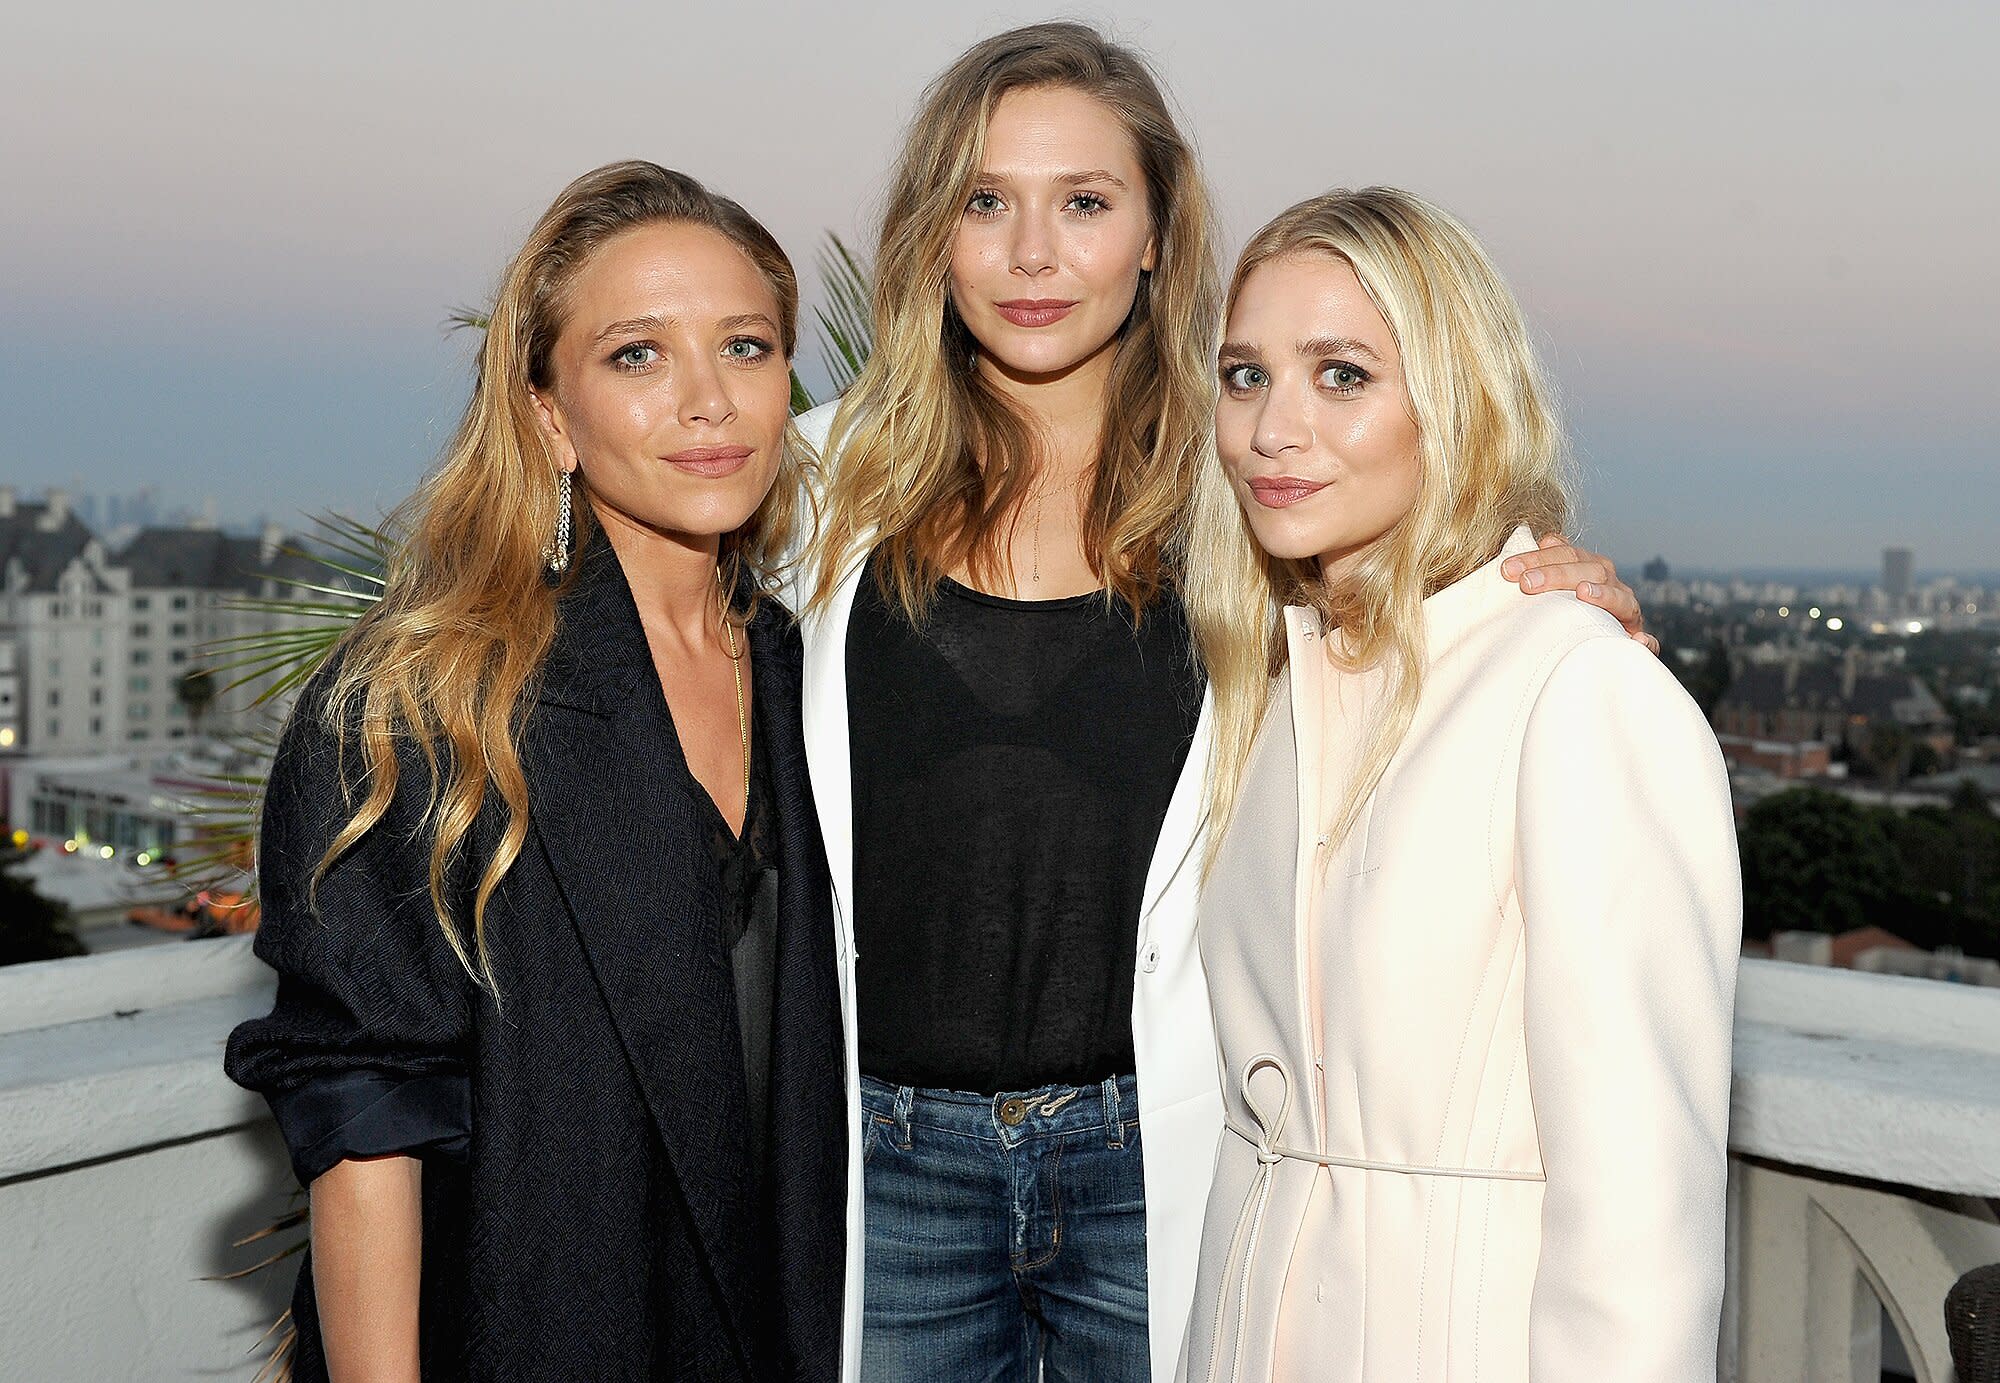 Elizabeth Olsen admits she was ‘very aware’ of the weight of the name Olsen when she started acting